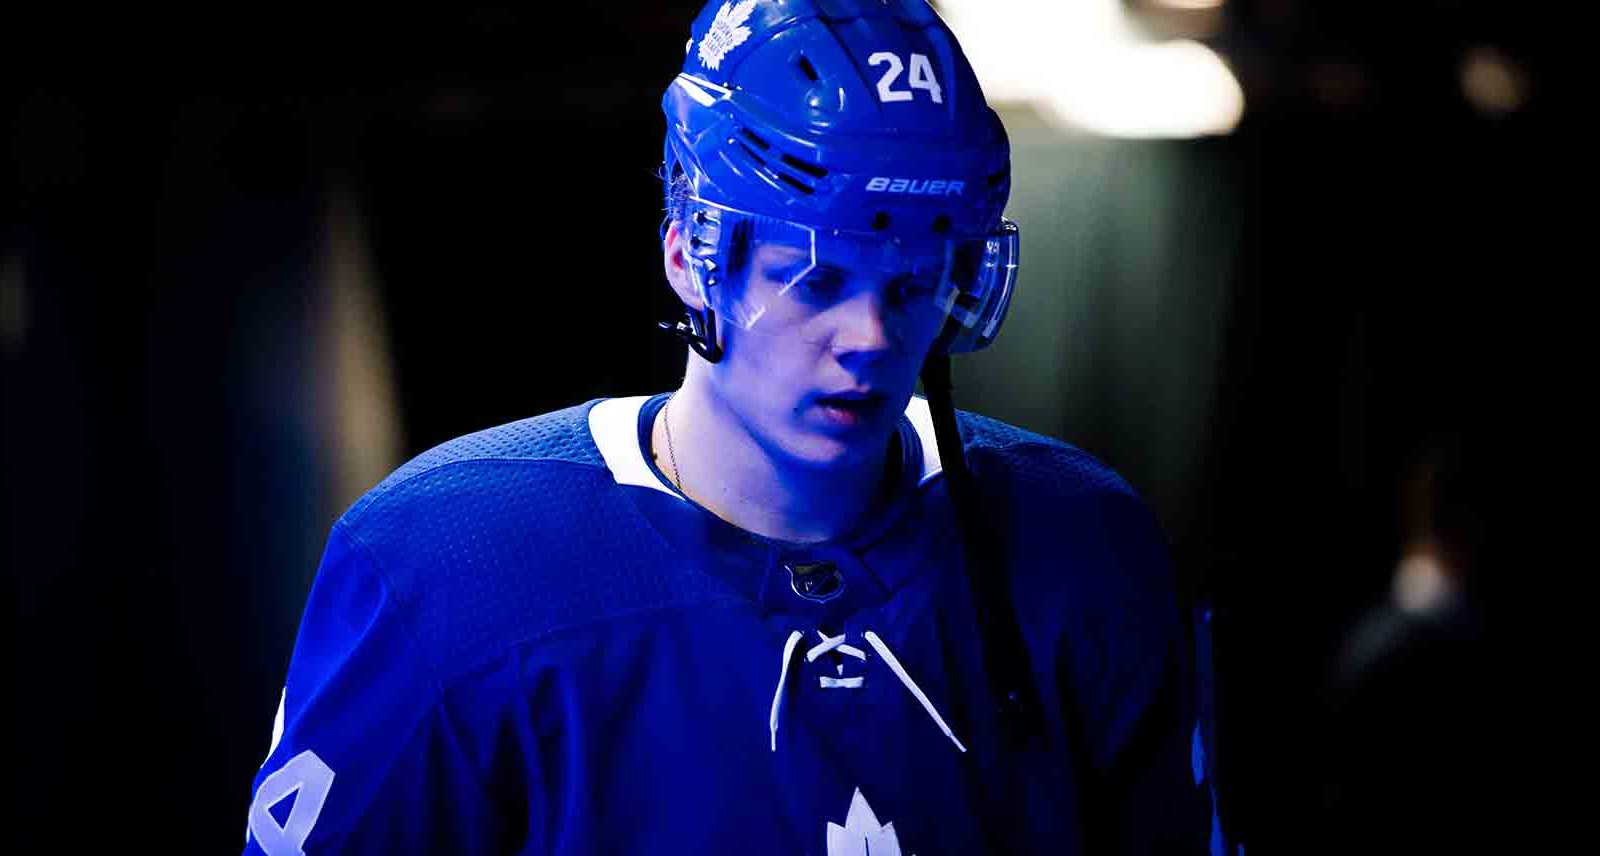 The Leafs' Kasperi Kapanen Talks Chirping His Dad Sami, and That Time Bates Battaglia Almost Beheaded Him When He Was 5